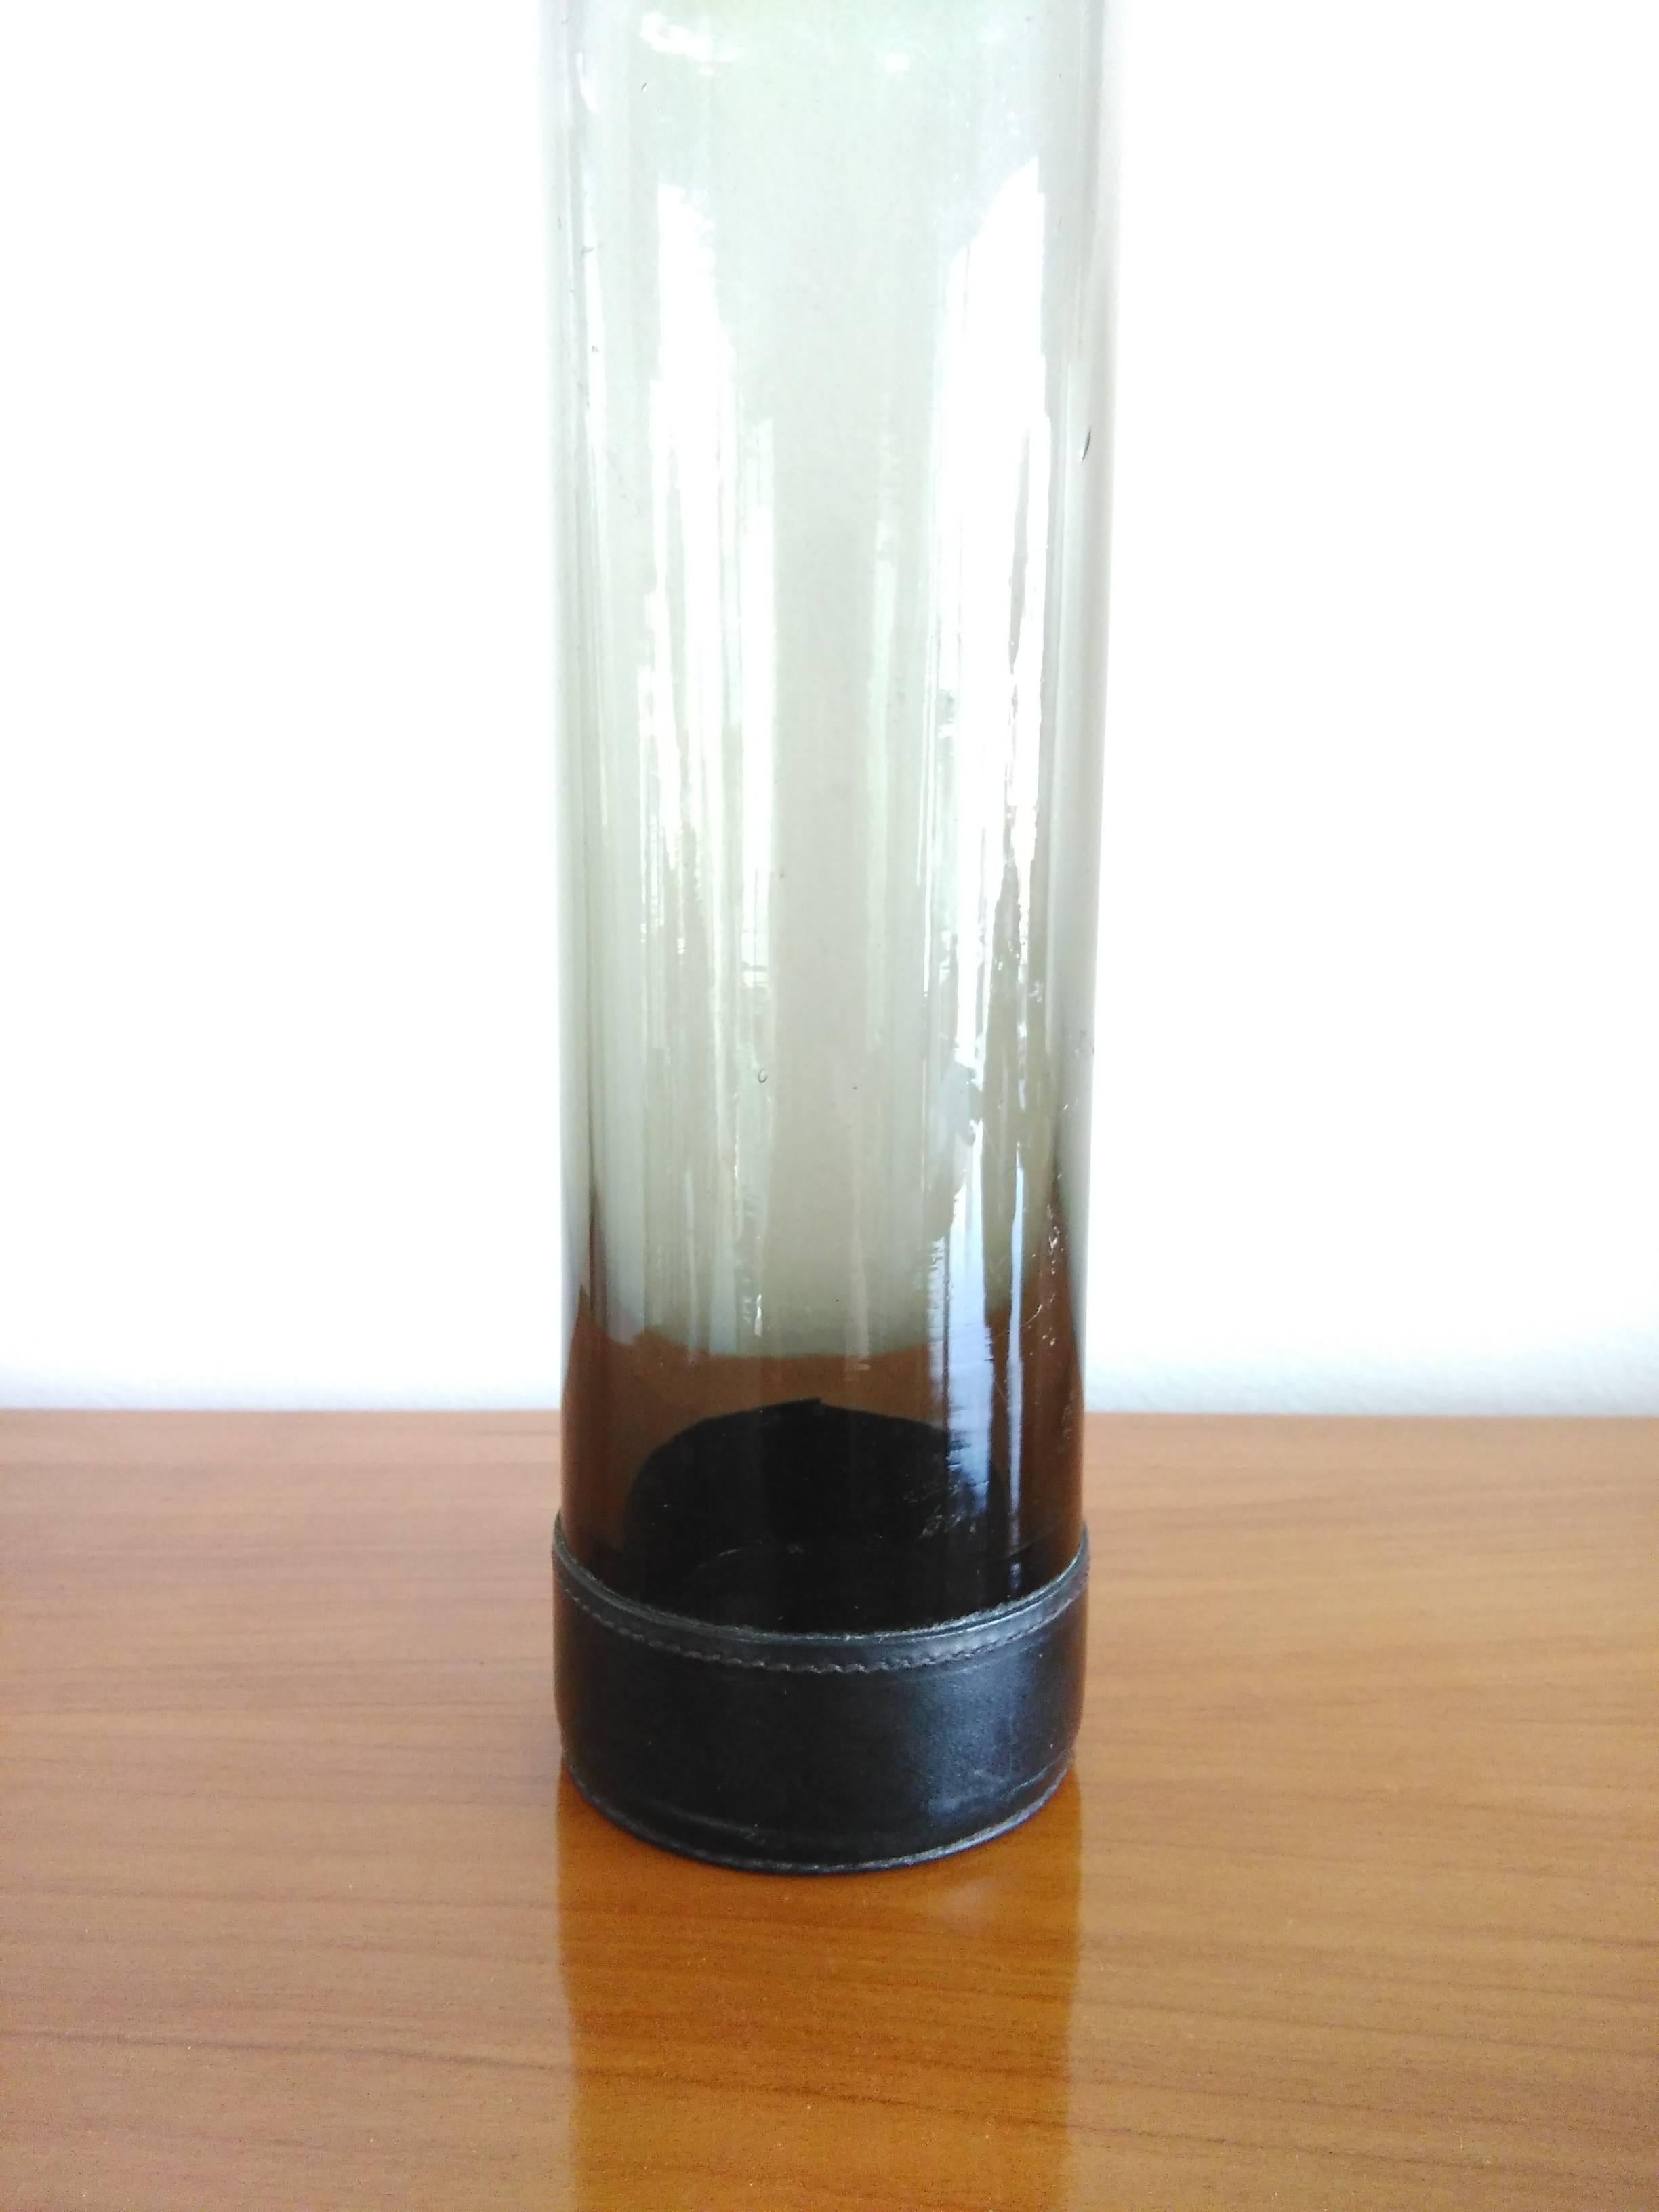 English Black Tinted and Stitched Leather Vase, England, 1960s For Sale